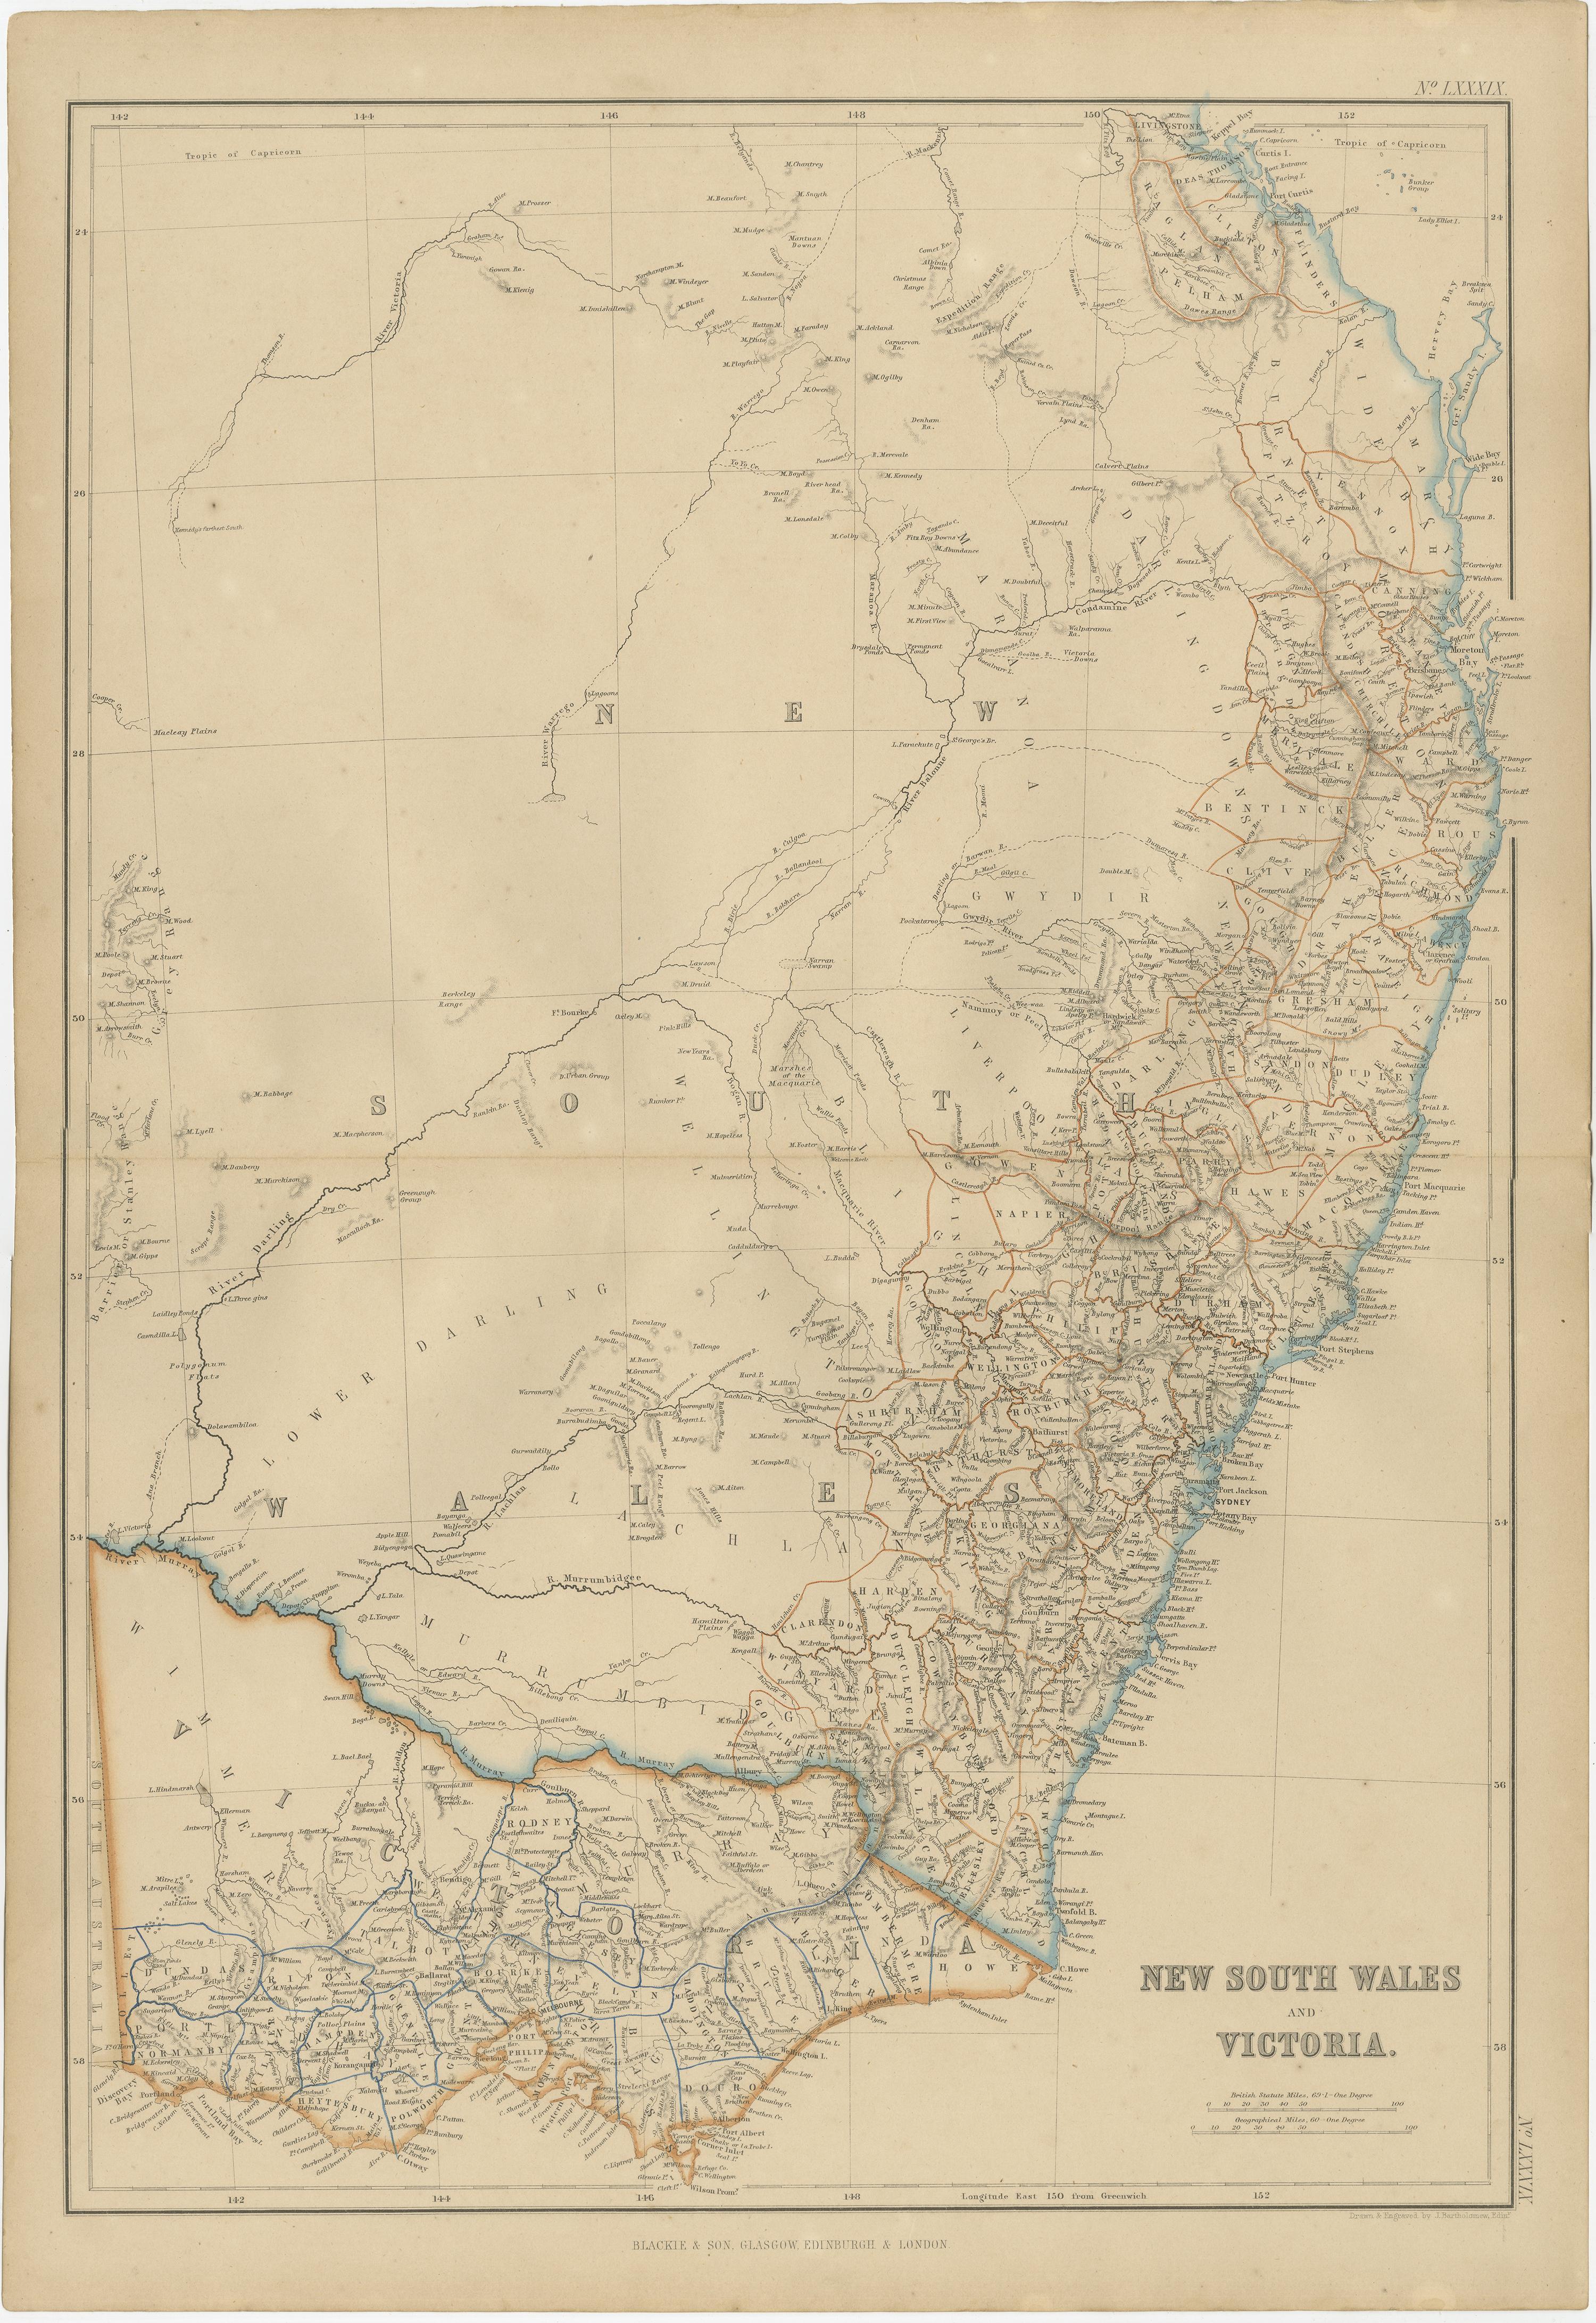 map of south australia and victoria